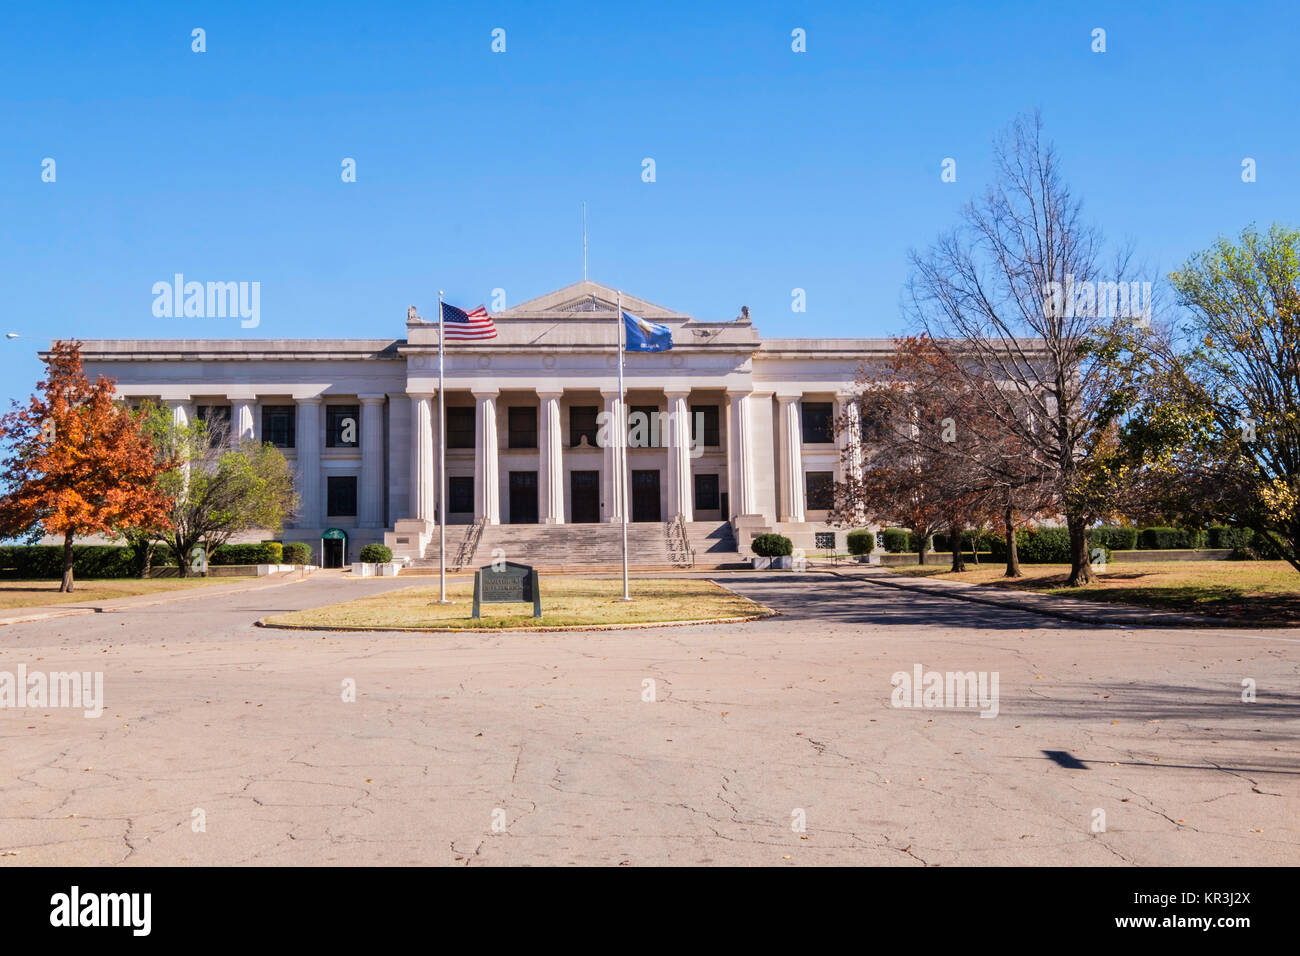 The Scottish Rite of Freemasonry temple, neo classic architecture with Doric columns in Guthrie, Oklahoma, USA. Stock Photo